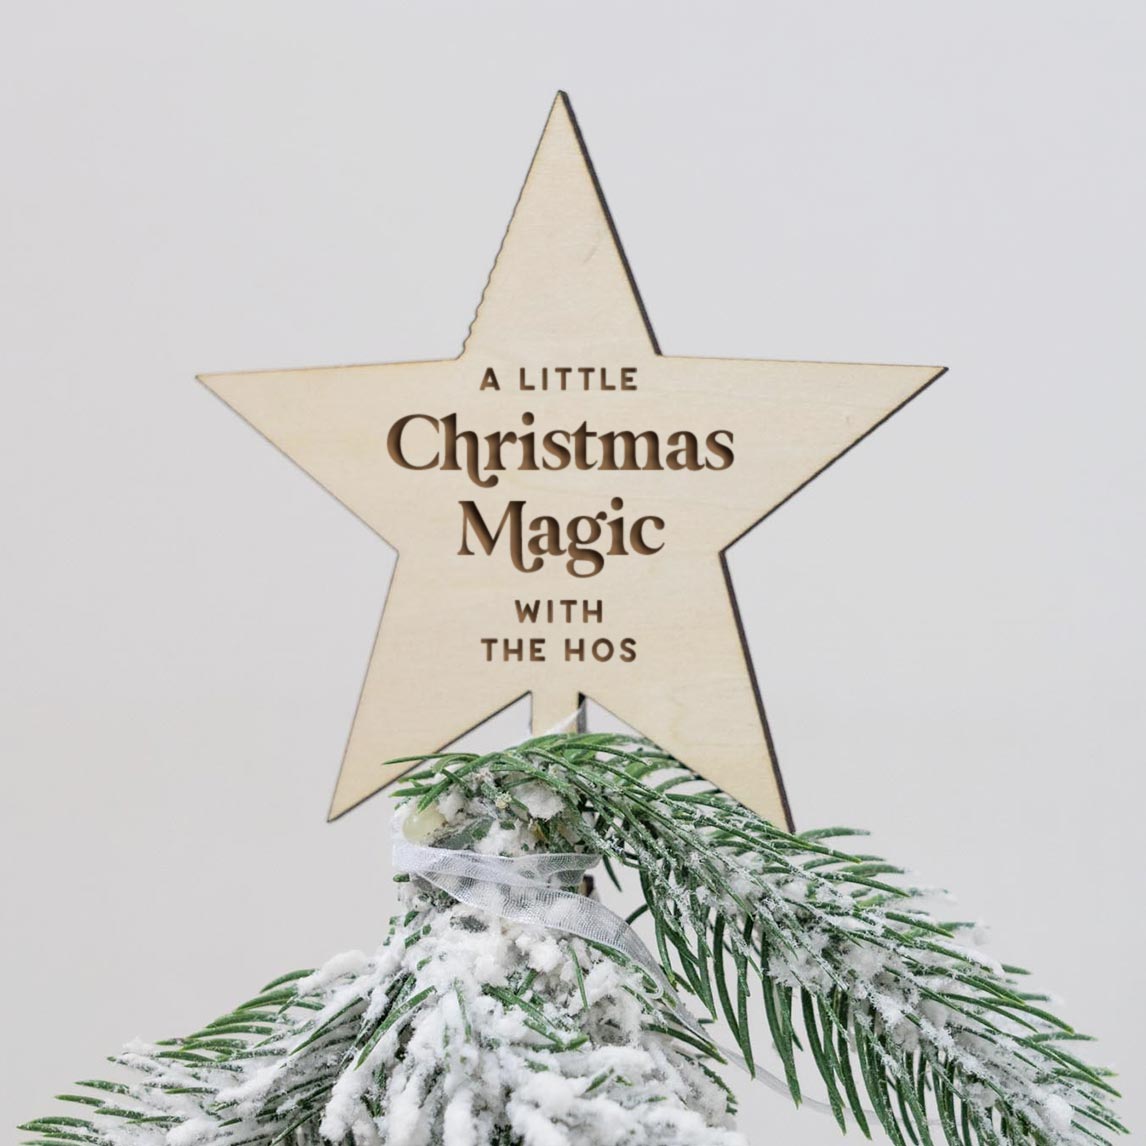 Personalised Christmas Tree Star Topper - Design 1 (A little Christmas Magic)